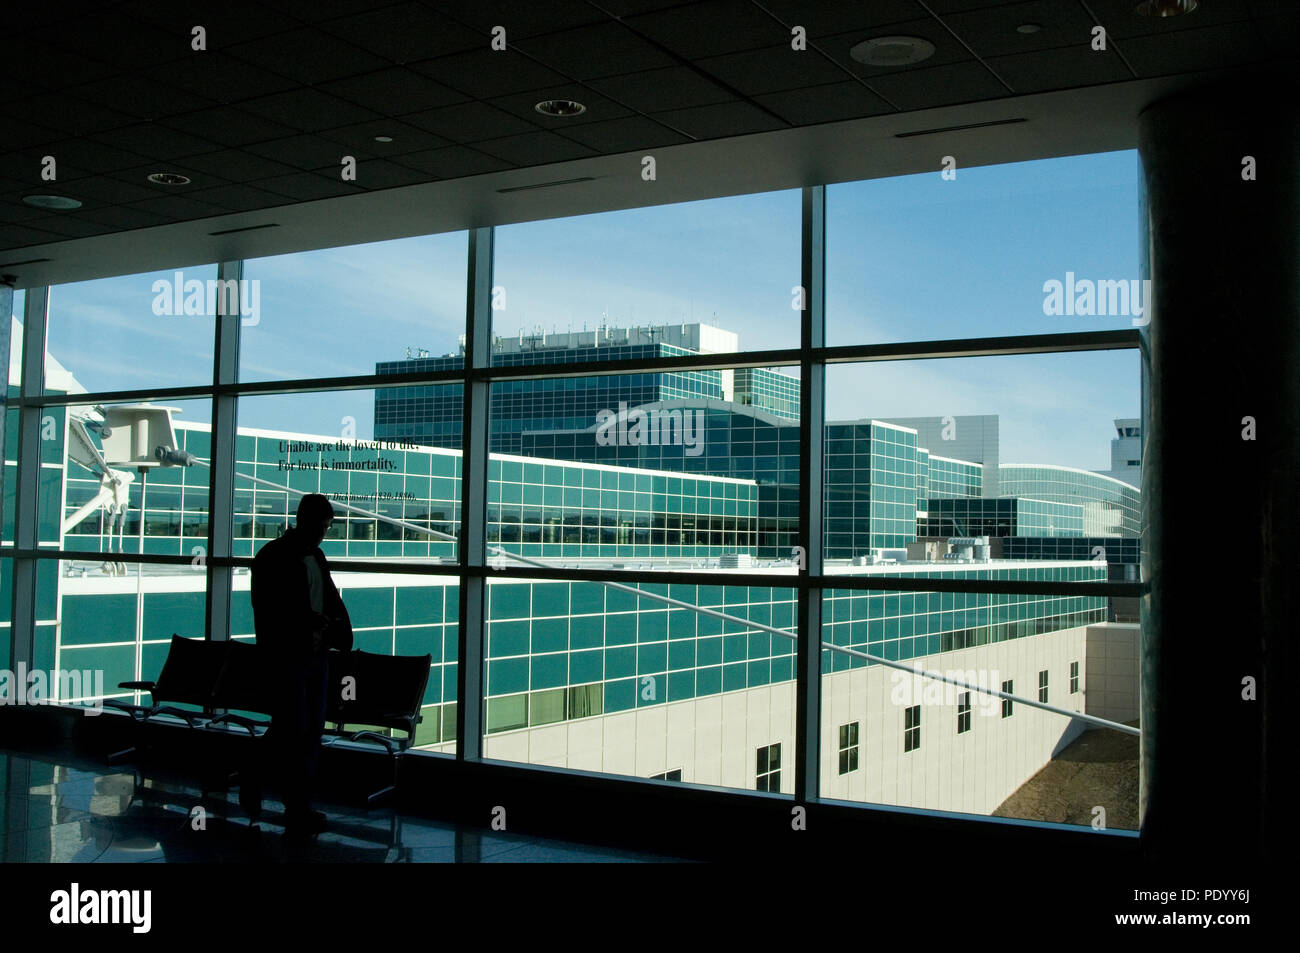 Silhouette of a man looking out the airport concourse window. Stock Photo